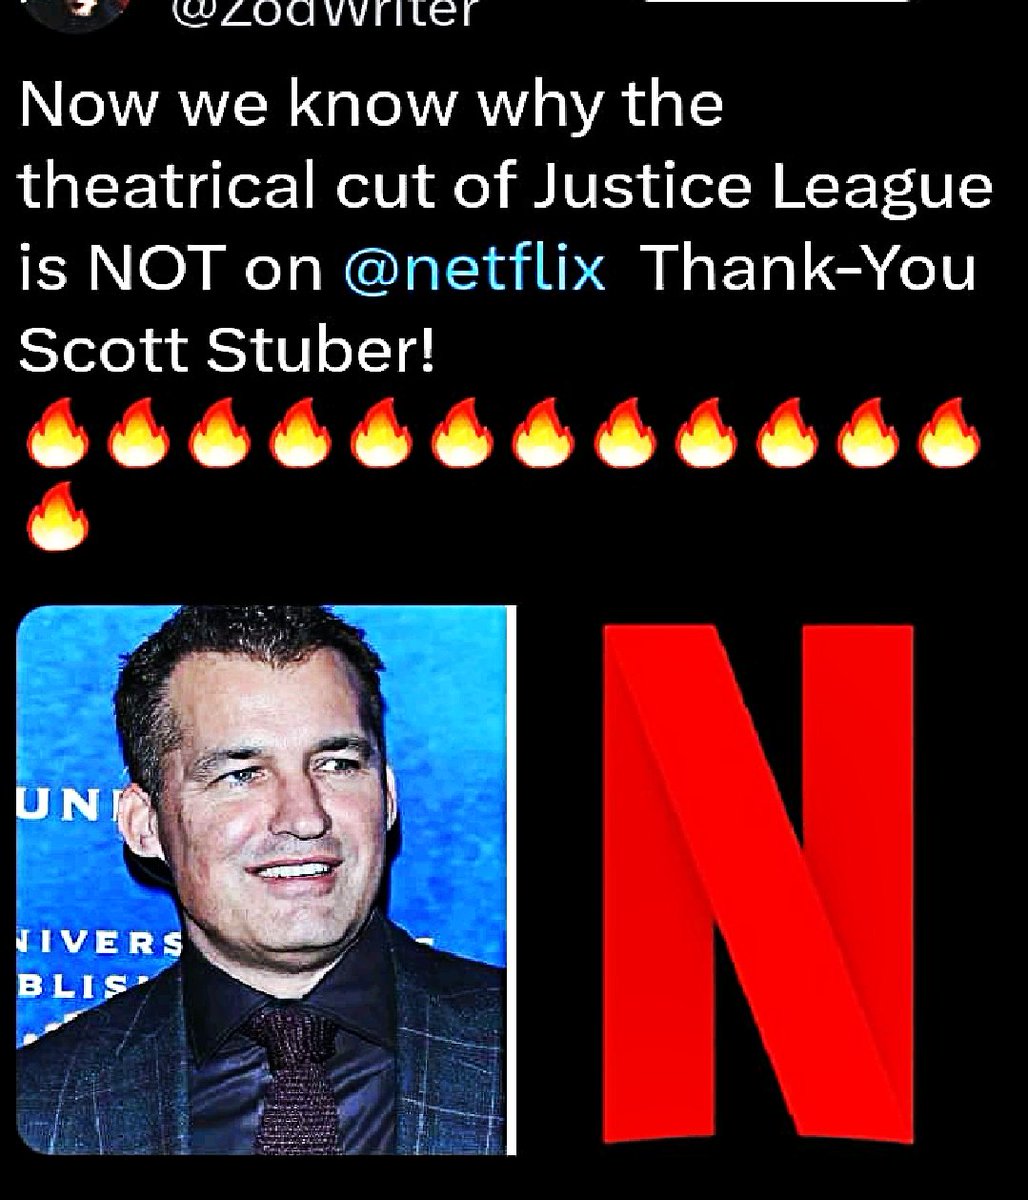 Netflix head of film says they would like to get them(characters) at some point. And definitely wants more of Zack, if we continue bombing all of wb movies they will be forced to sell
#SellTheSnyderverseToNetflix